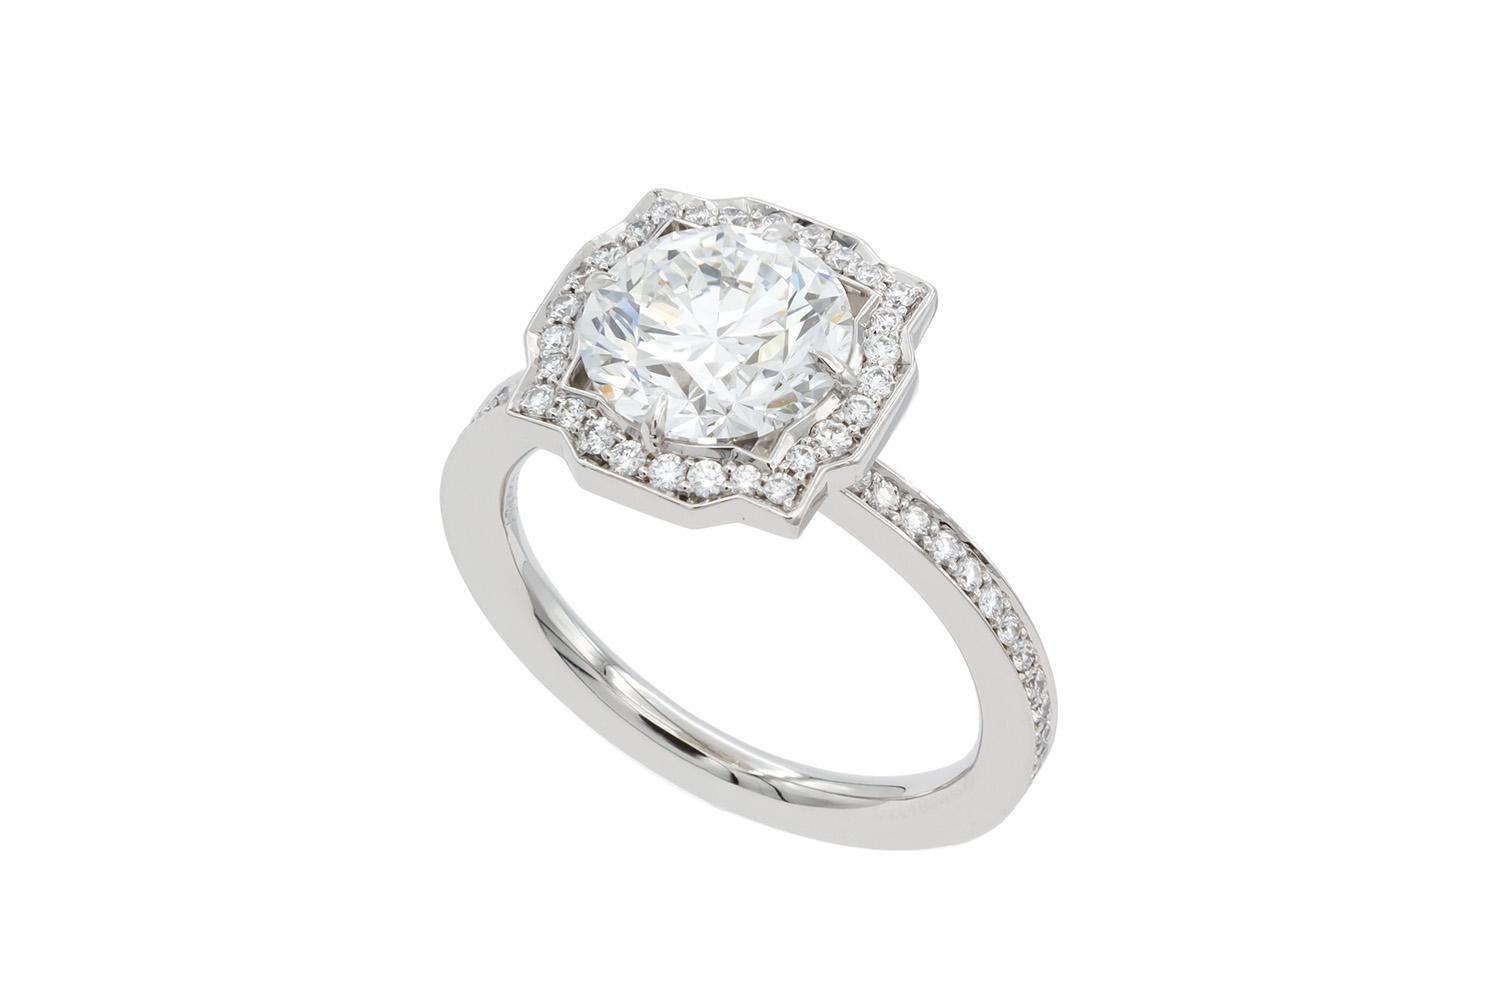 We are very pleased to present this truly remarkable Harry Winston Platinum & Round Brilliant Diamond 